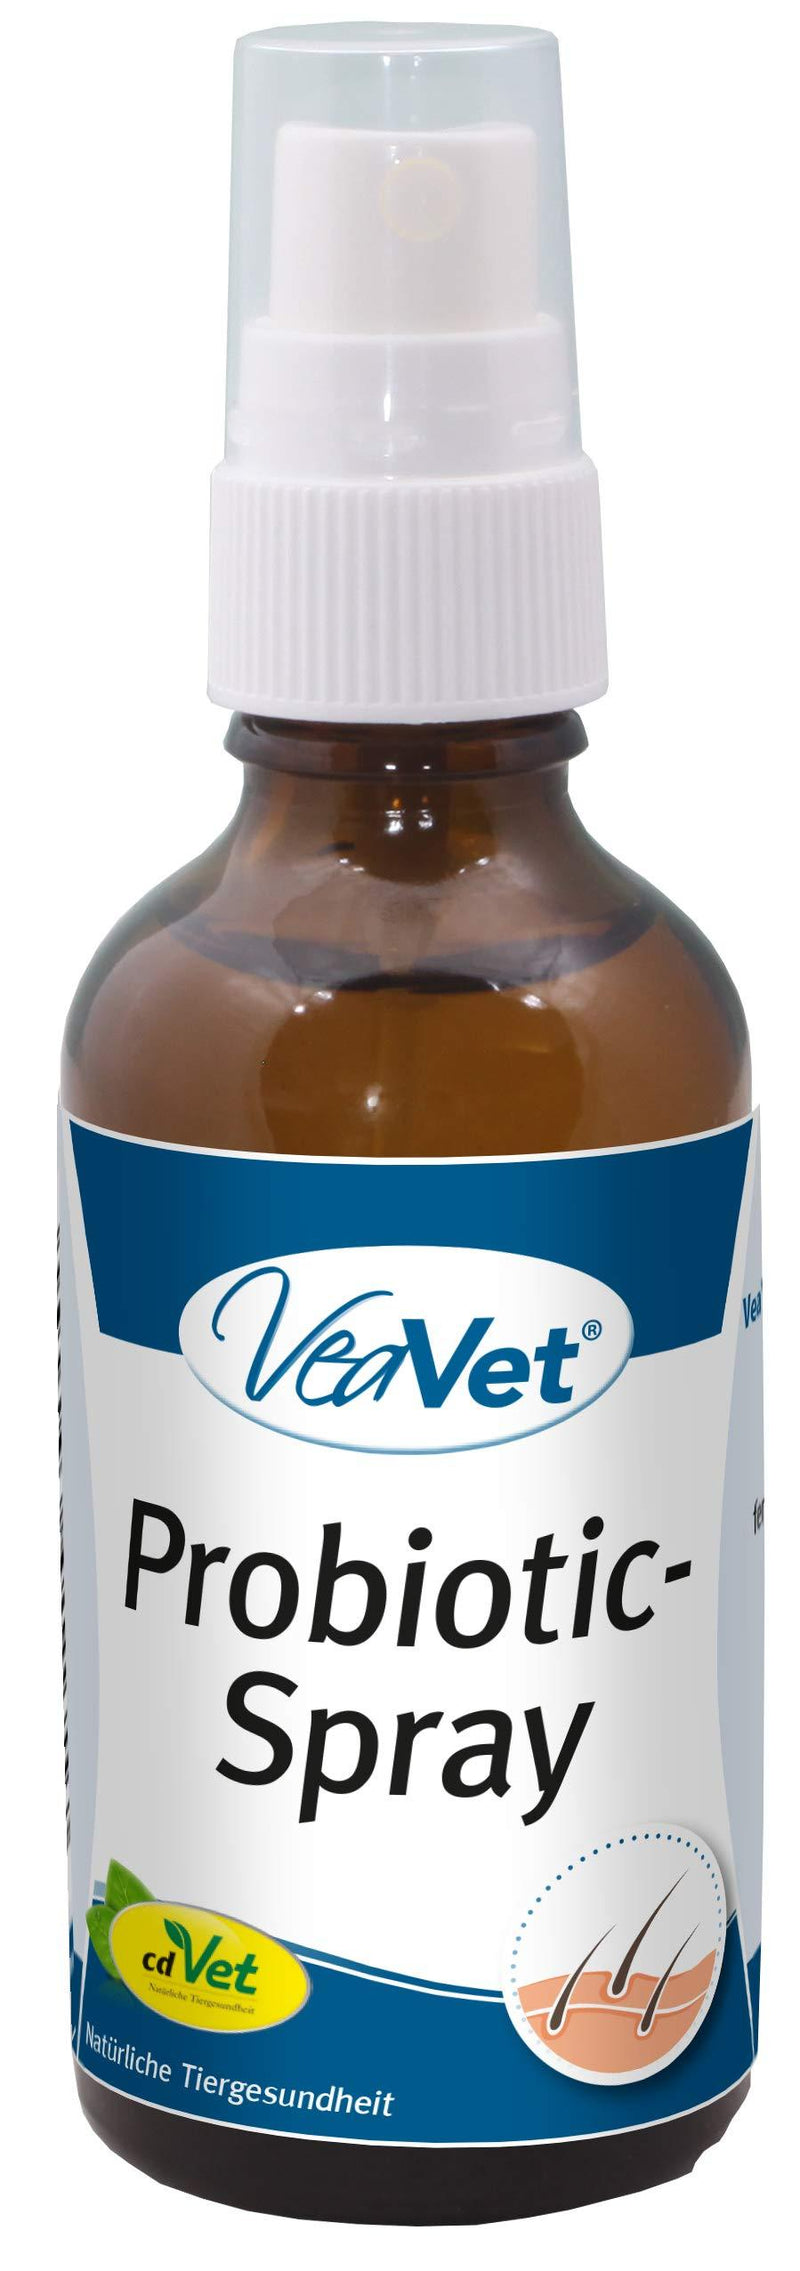 cdVet Naturprodukte VeaVet Probiotic-Spray 50 ml - Dog, cat - care spray - for fungus and germ-prone skin - protection - stressed + sore skin - bacteria - healthy - well-being - - PawsPlanet Australia